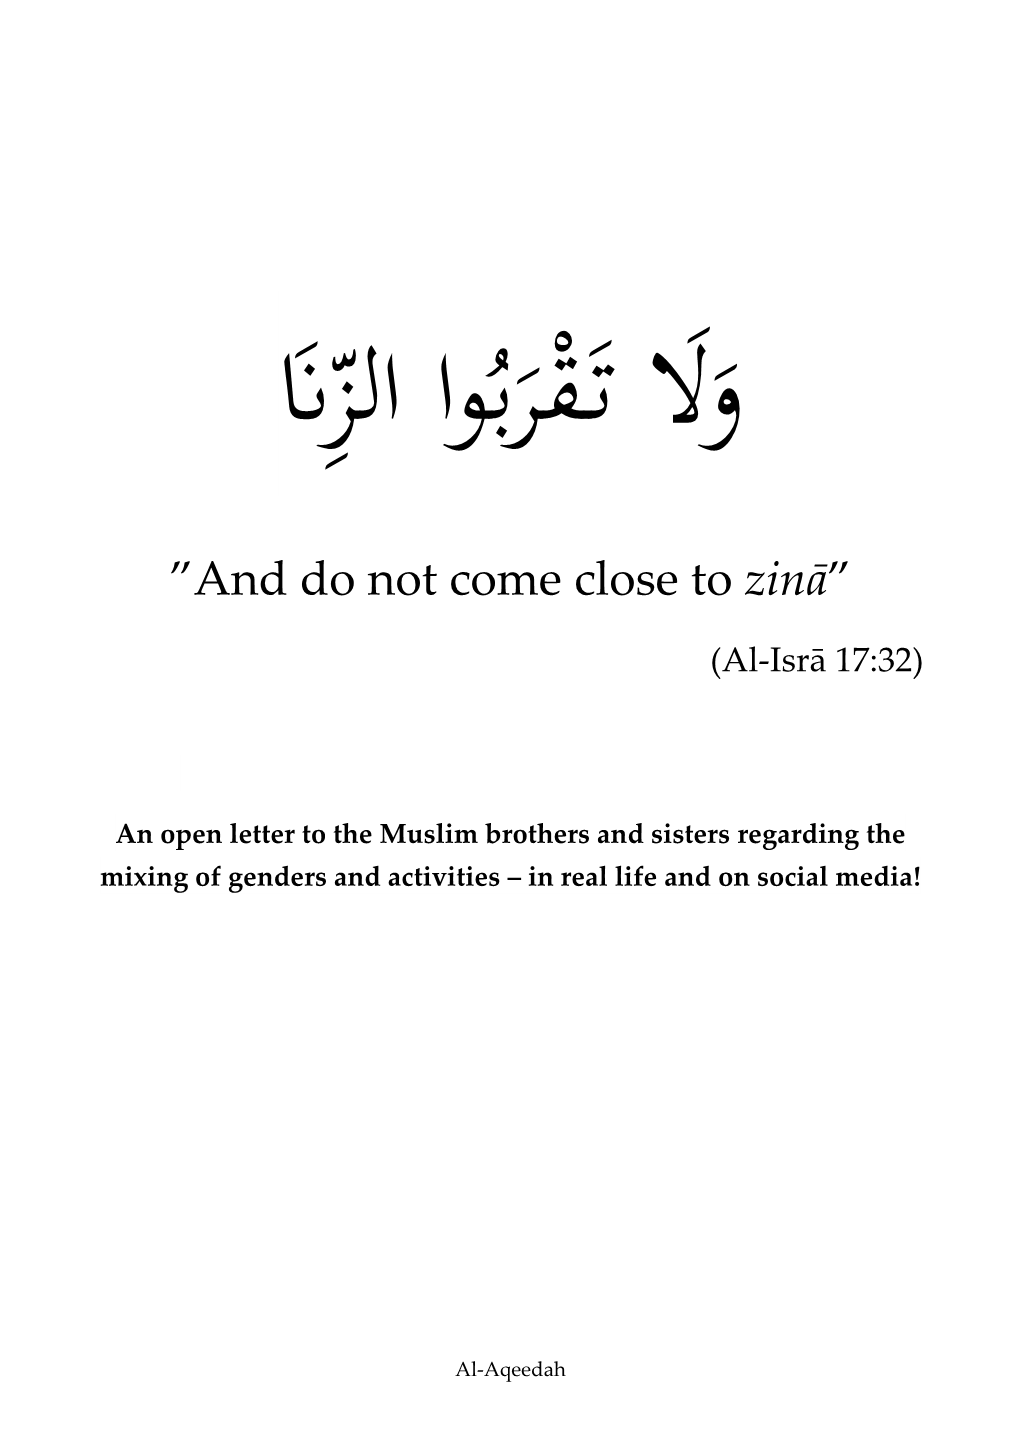 And Do Not Come Close to Zinā”